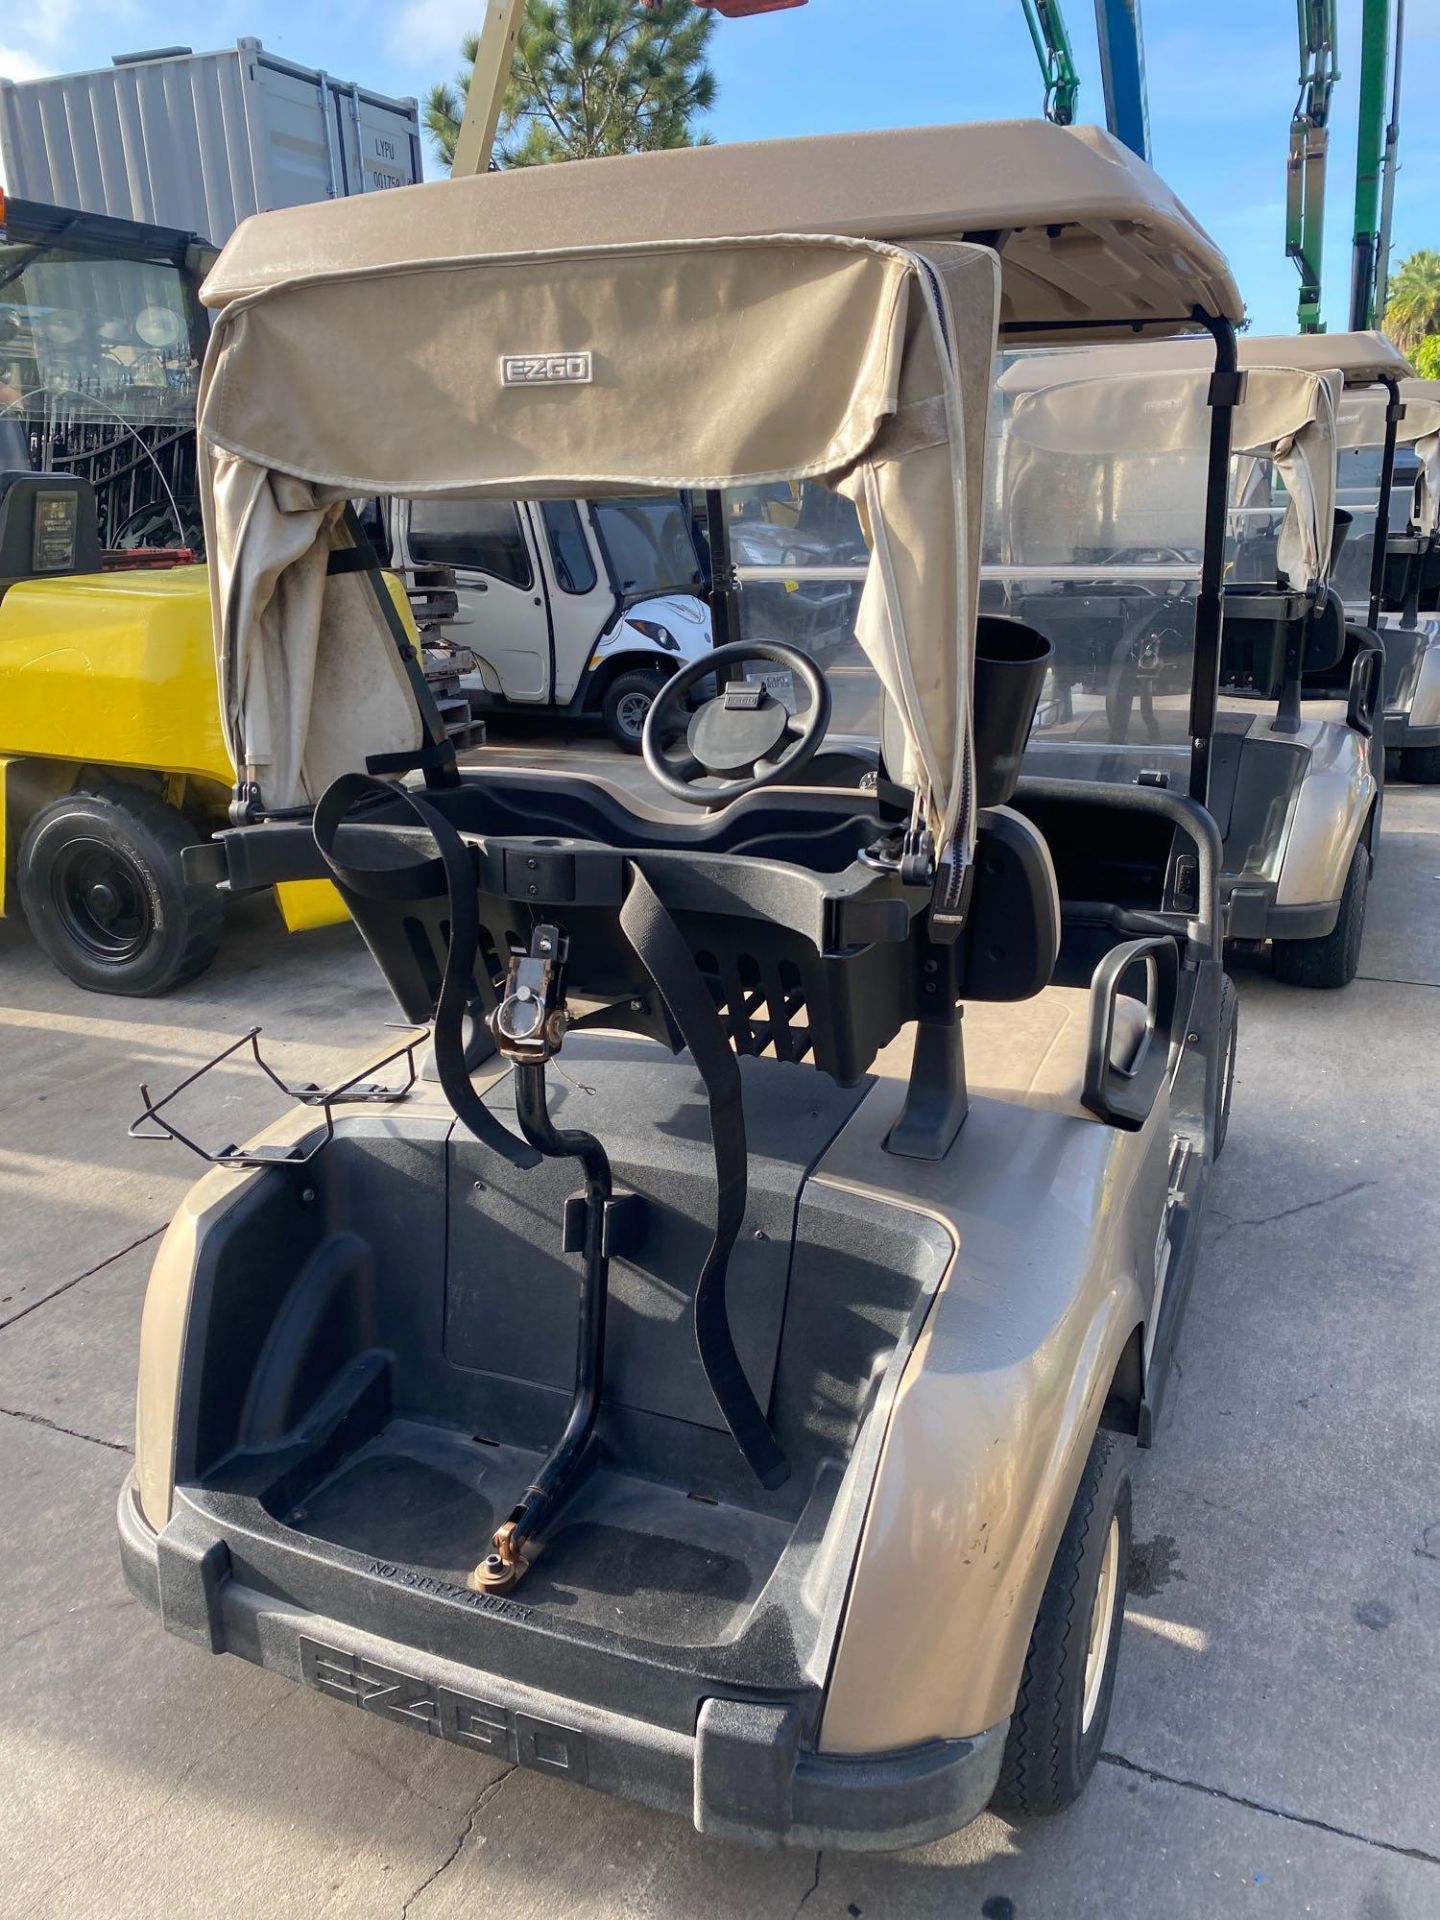 2016 EZGO RXV GOLF CART, TROJAN WATER SYSTEM, DELTA-Q SC-48 BATTERY CHARGER, 48V, WINDSHIELD, REAR S - Image 4 of 8